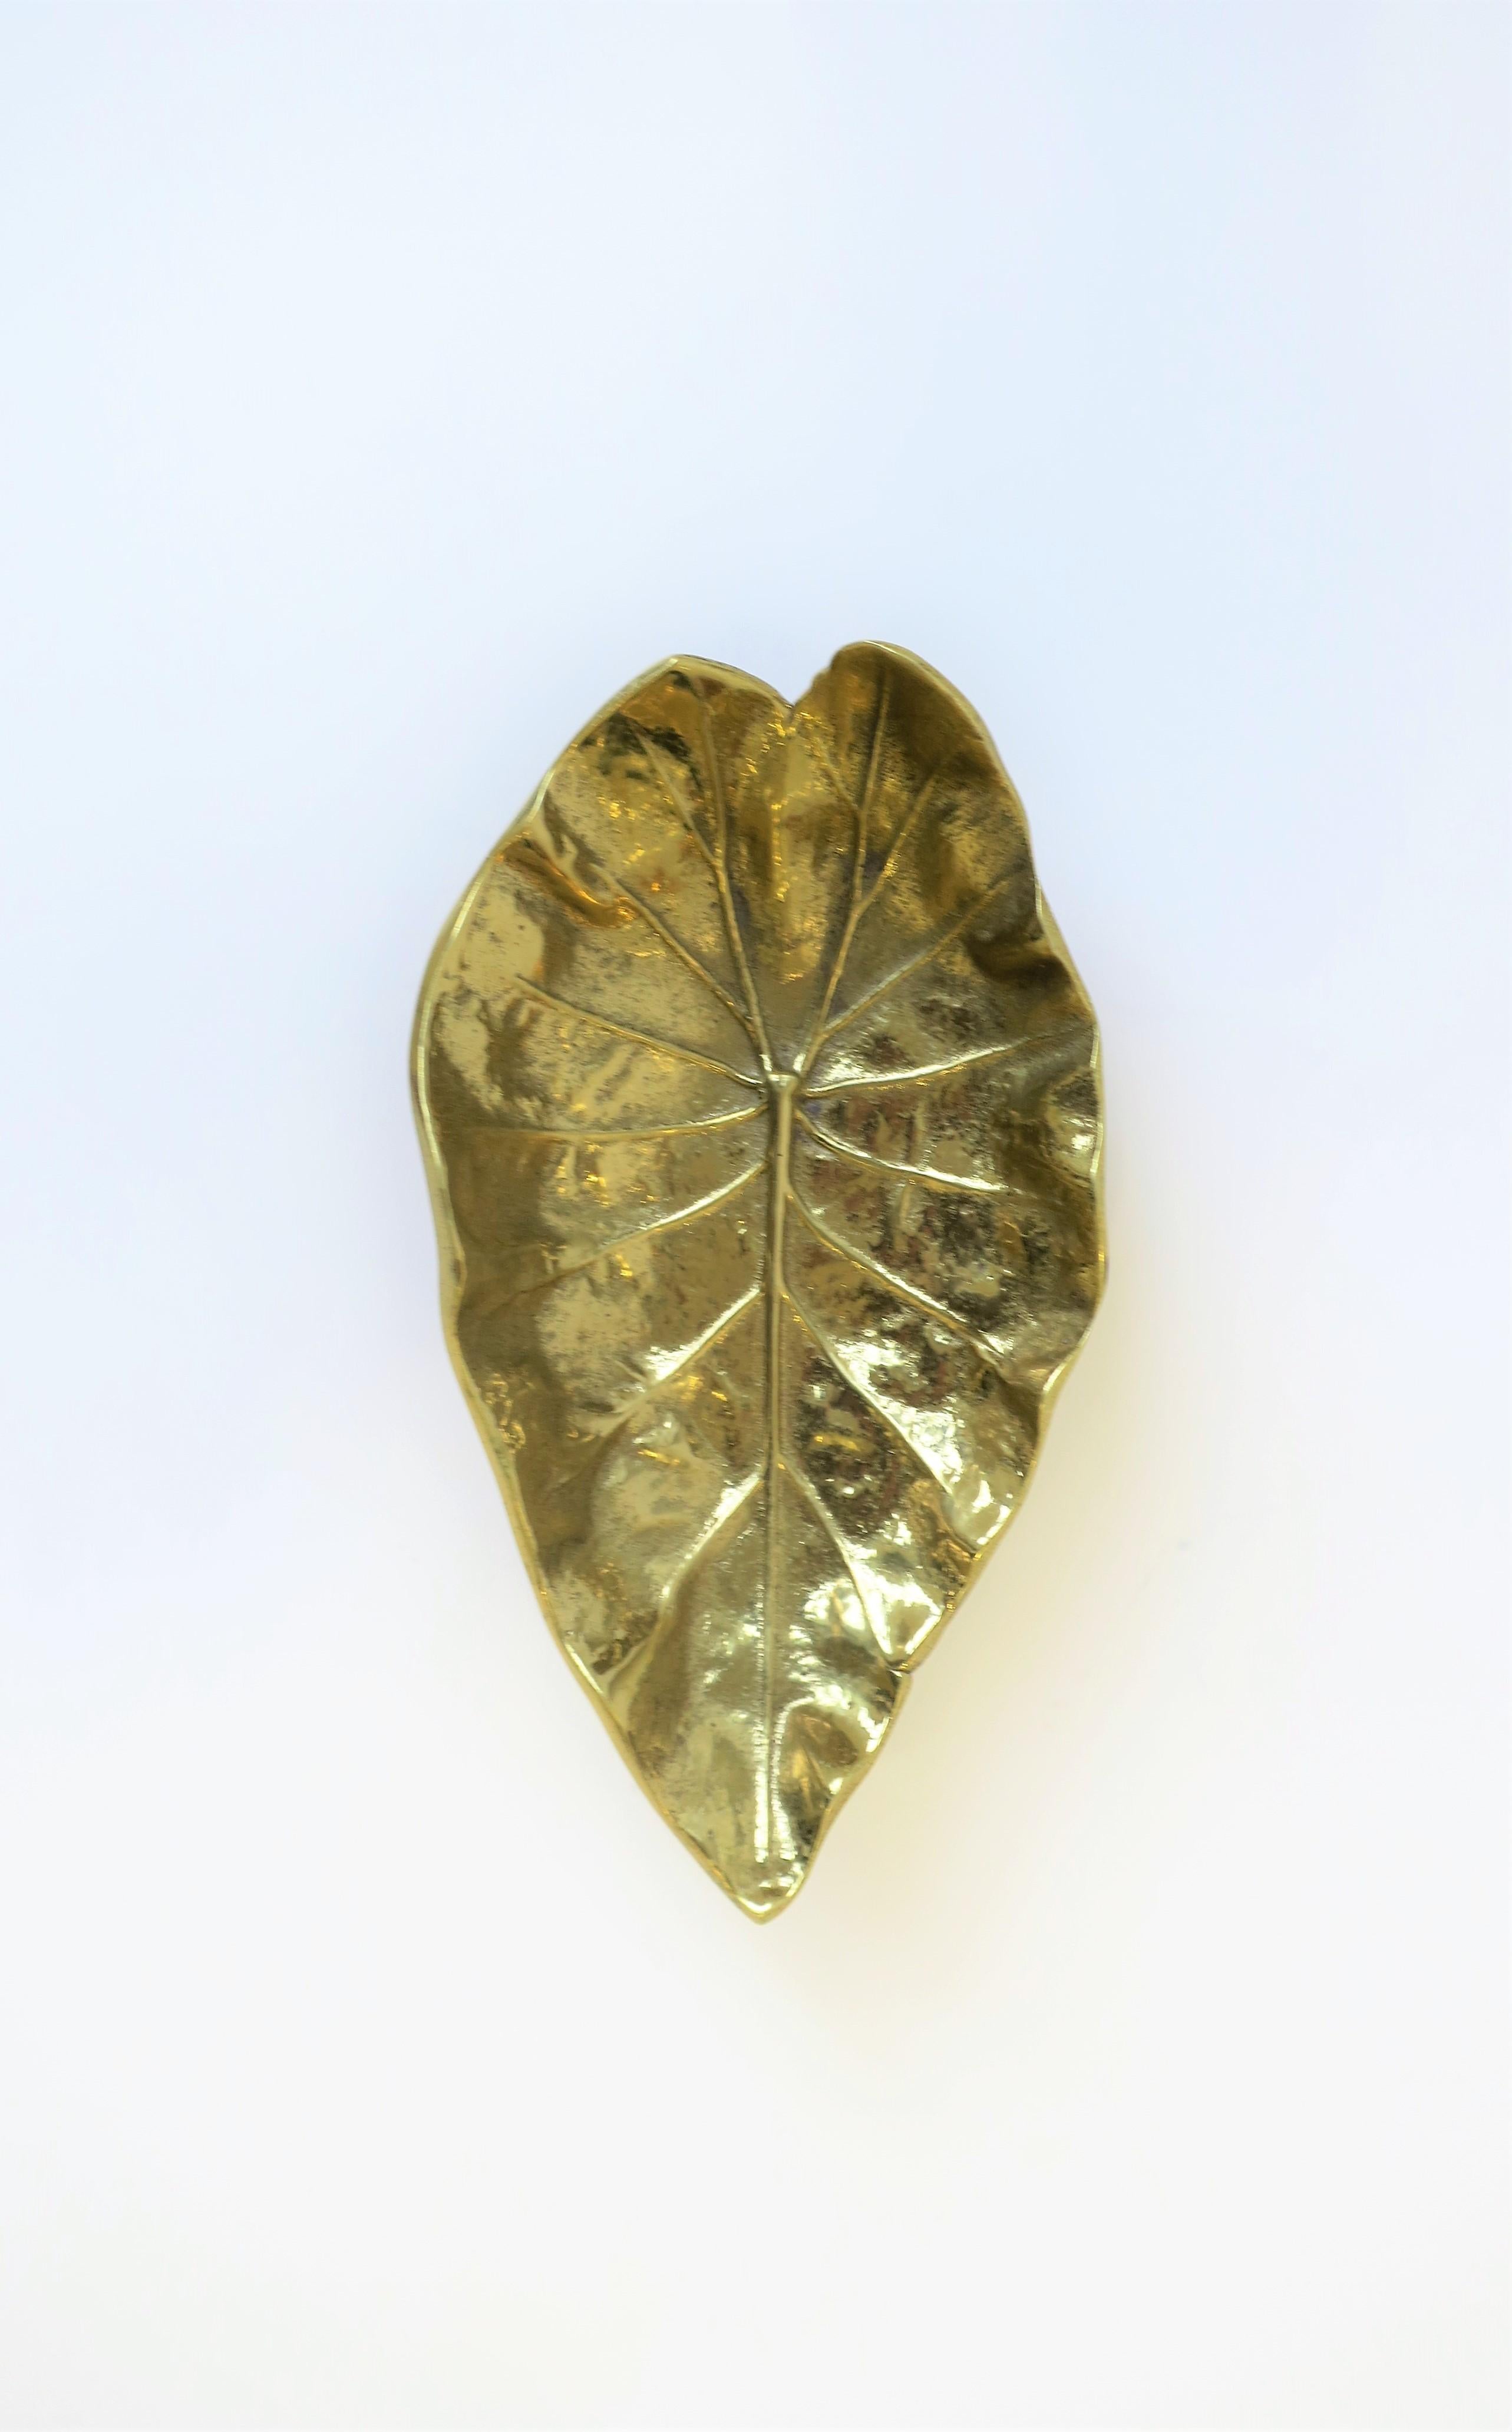 A substantial solid brass leaf form decorative or vanity/jewelry dish, mid-20th century, 1956. Beautiful as a piece standalone object or for small items. Piece is marked on bottom as shown in last image. 

Dimensions: 2.75